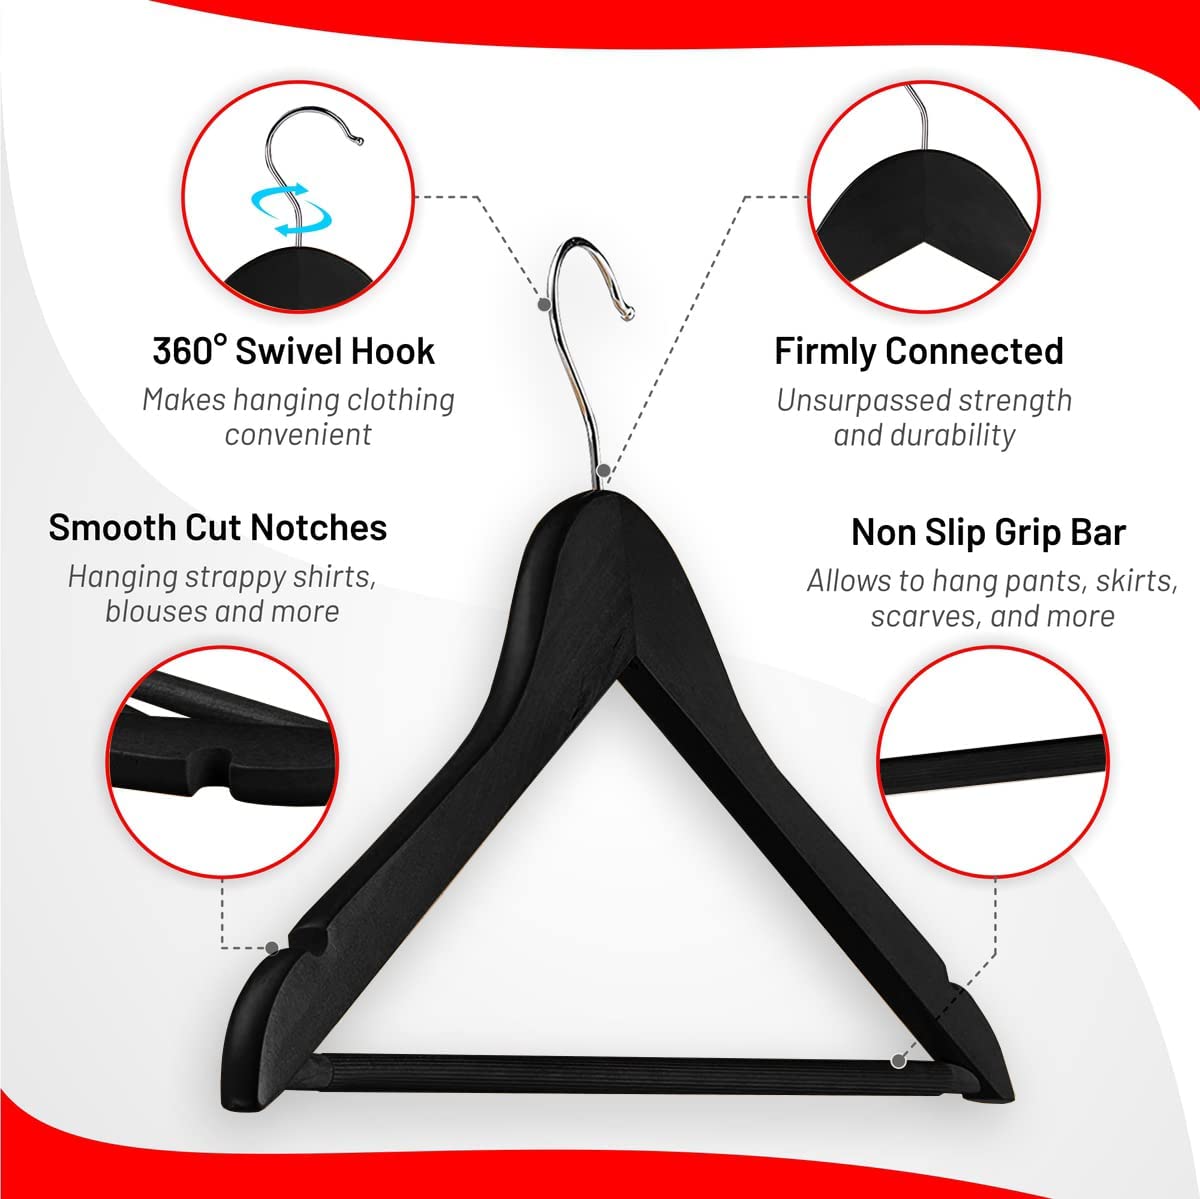 Wooden Clothes Hangers With Grooves - Suit Hangers With 360-degree  Rotatable Hook, Wooden Coat Hangers - Heavy Duty Hangers For Clothes, Jacket,  Shirt, Tank Top, Dress - Dorm And Bedroom Wardrobe Organizer